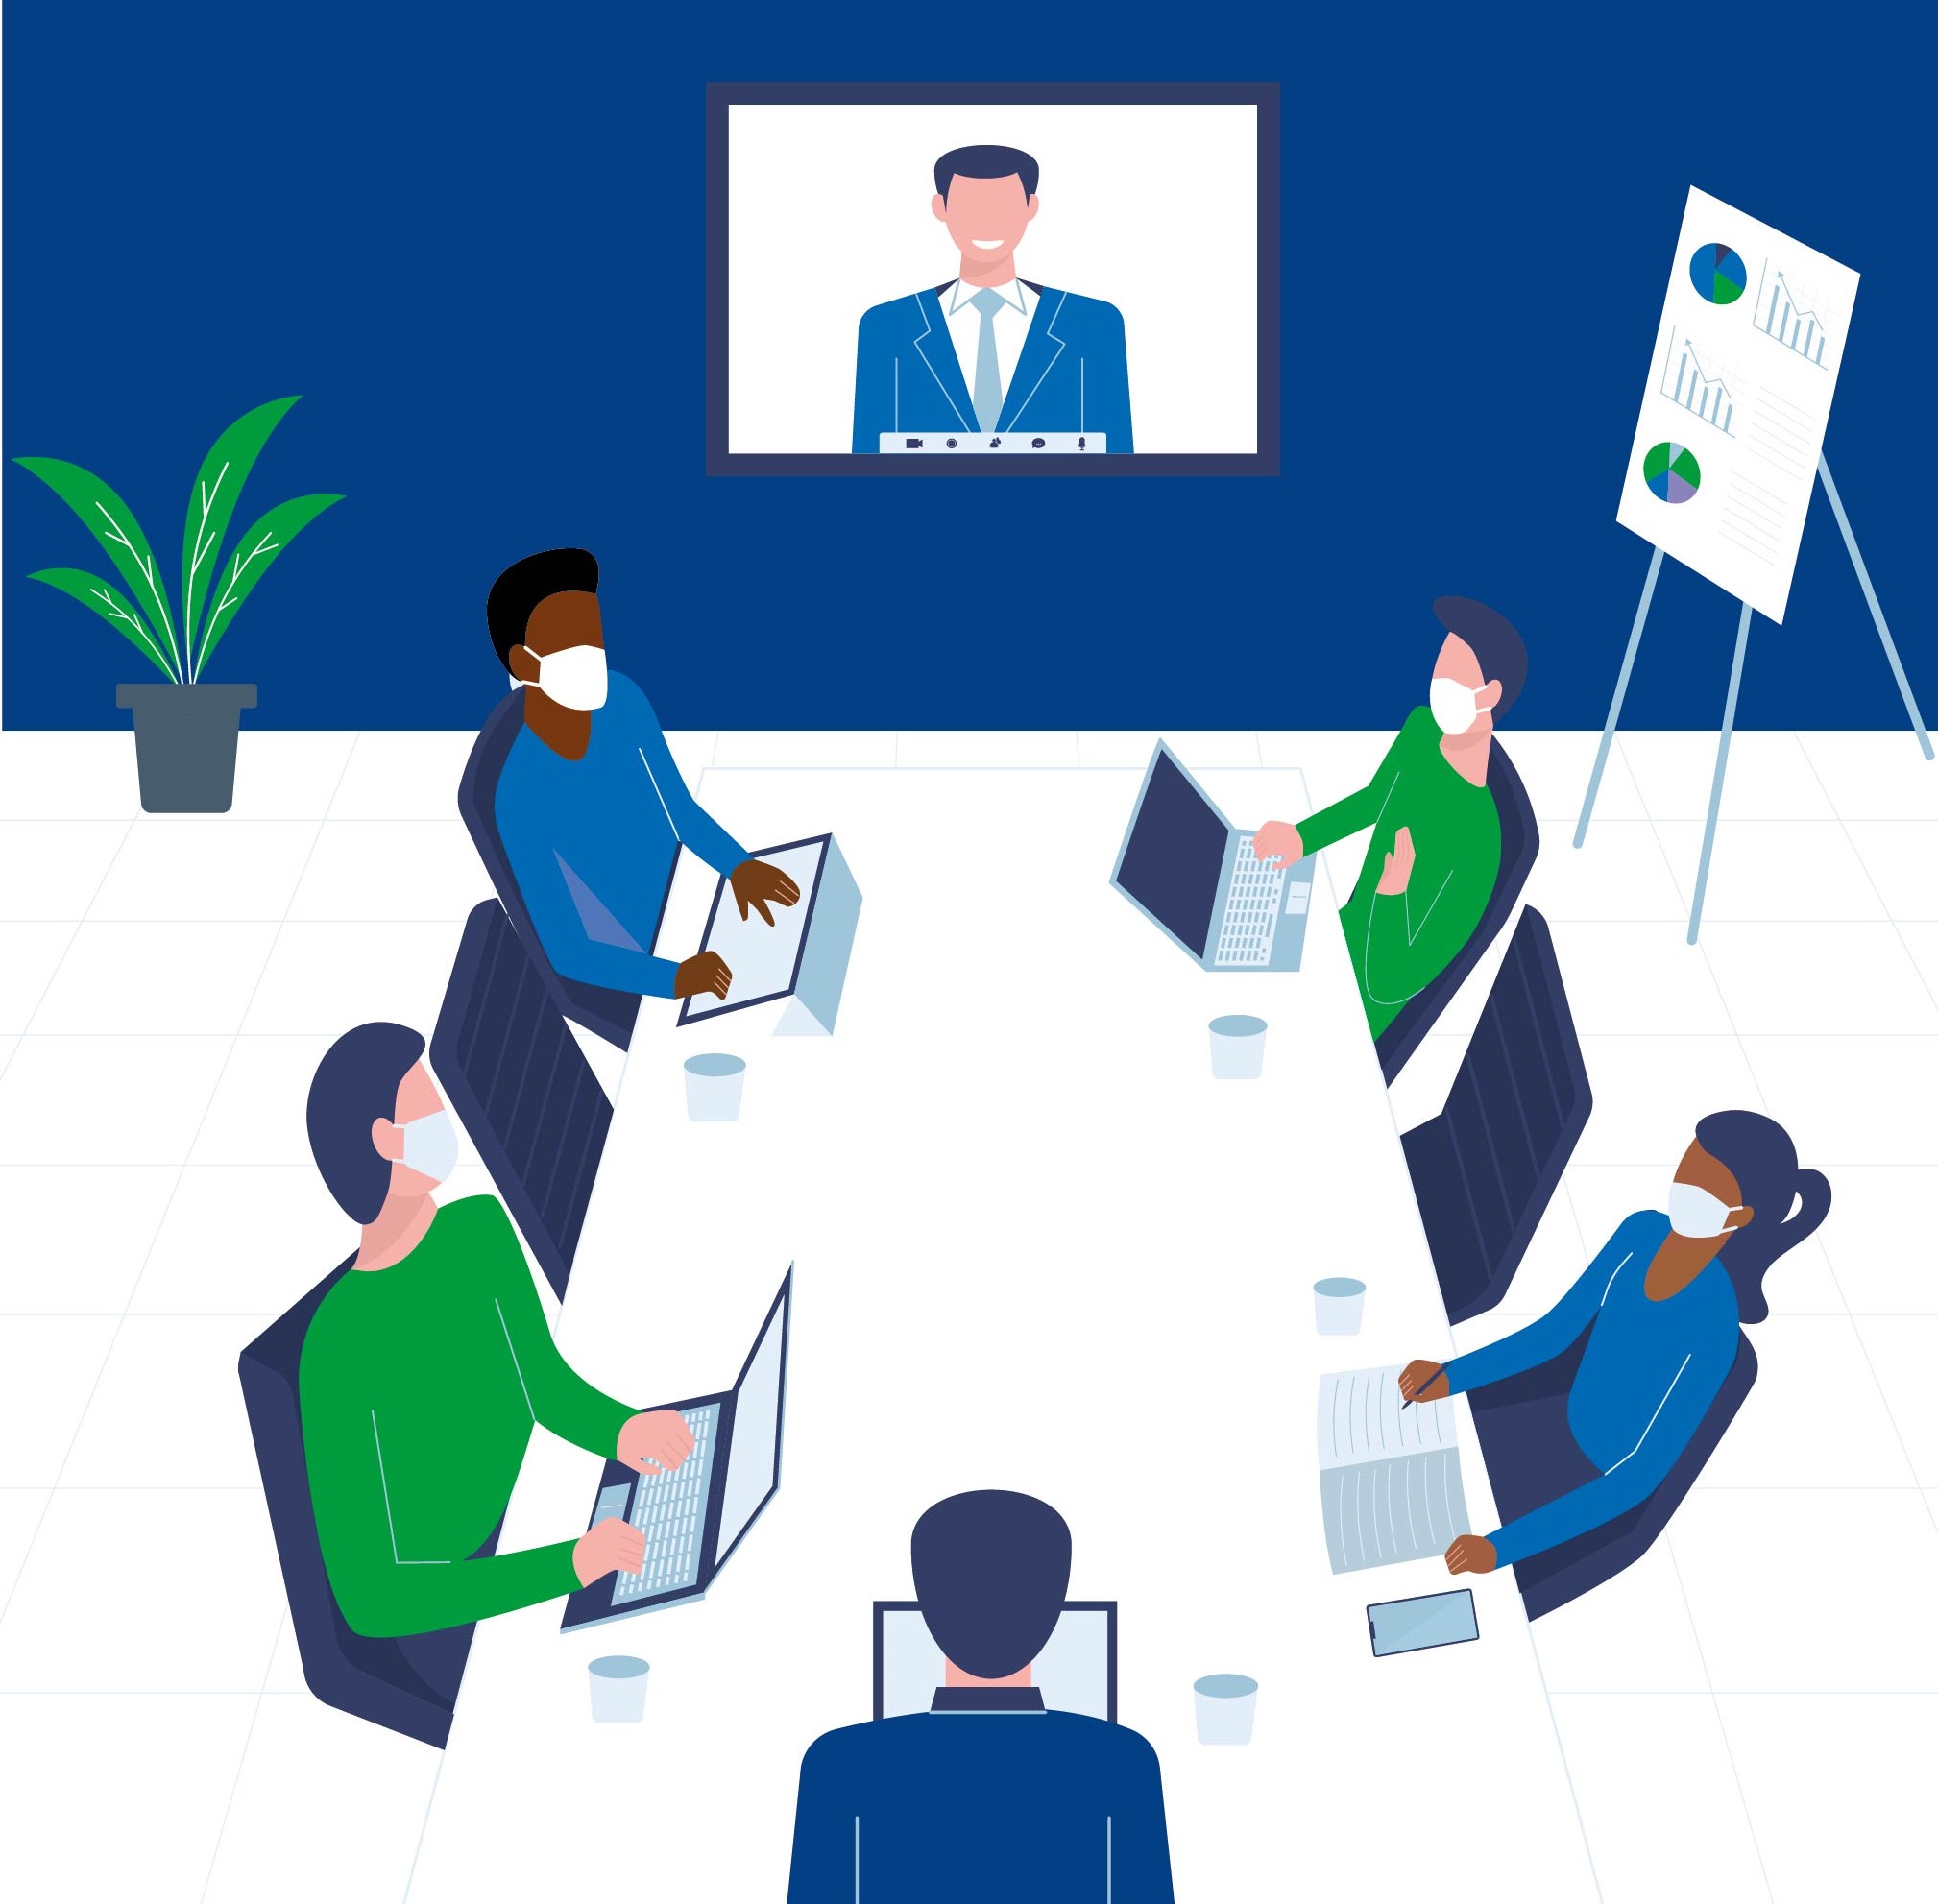 Image of people sitting in a meeting room